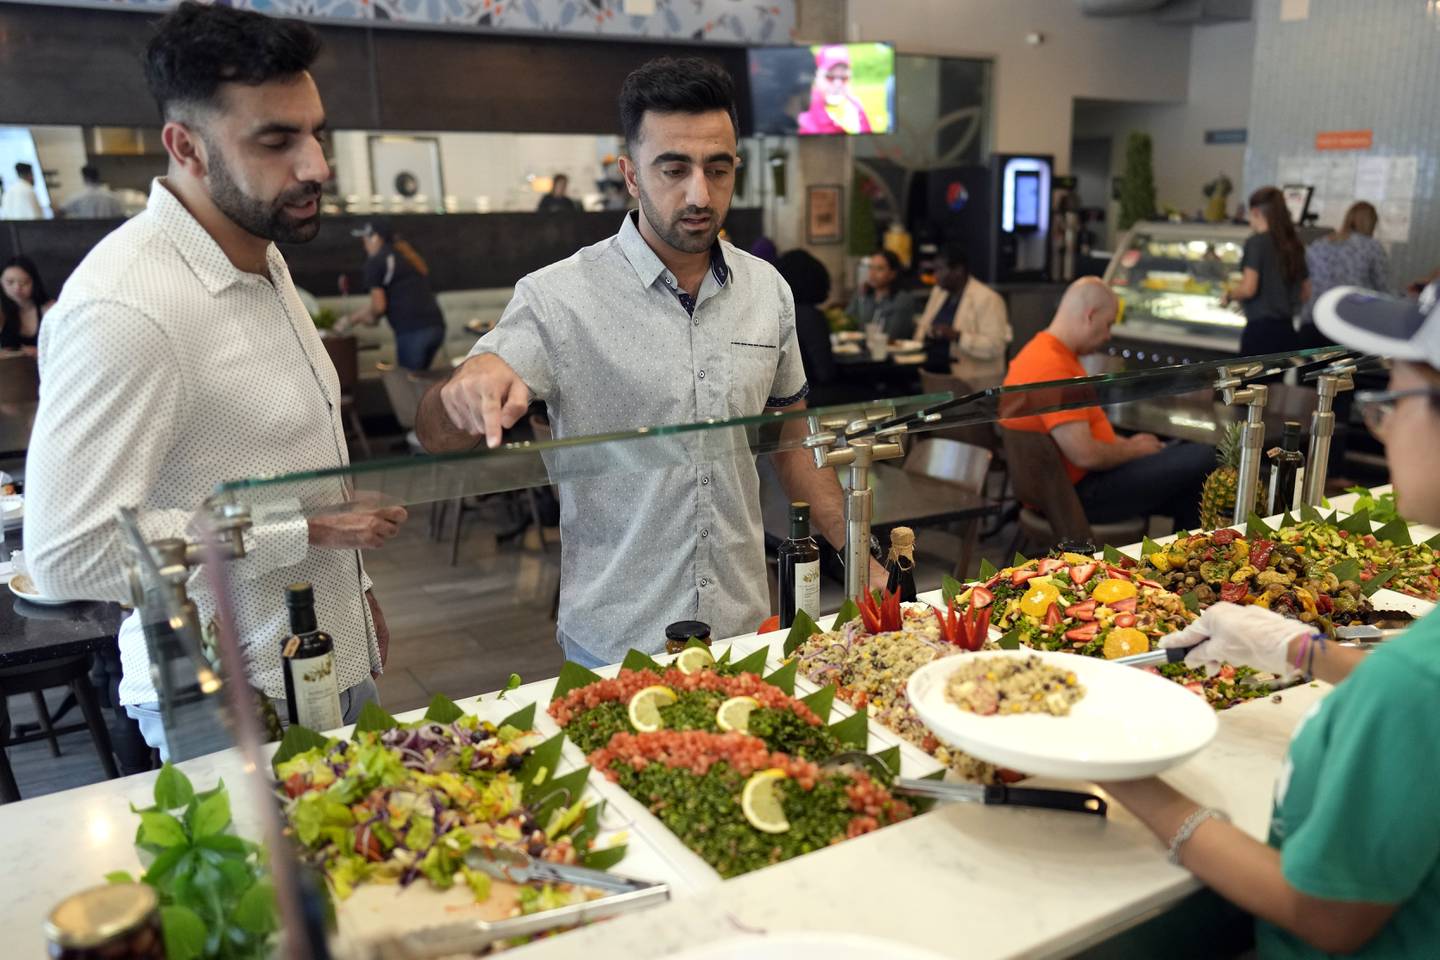 Abdul Wasi Safi, right, and his brother Samiullah pick out food for lunch, Wednesday, April 26, 2023, in Houston.